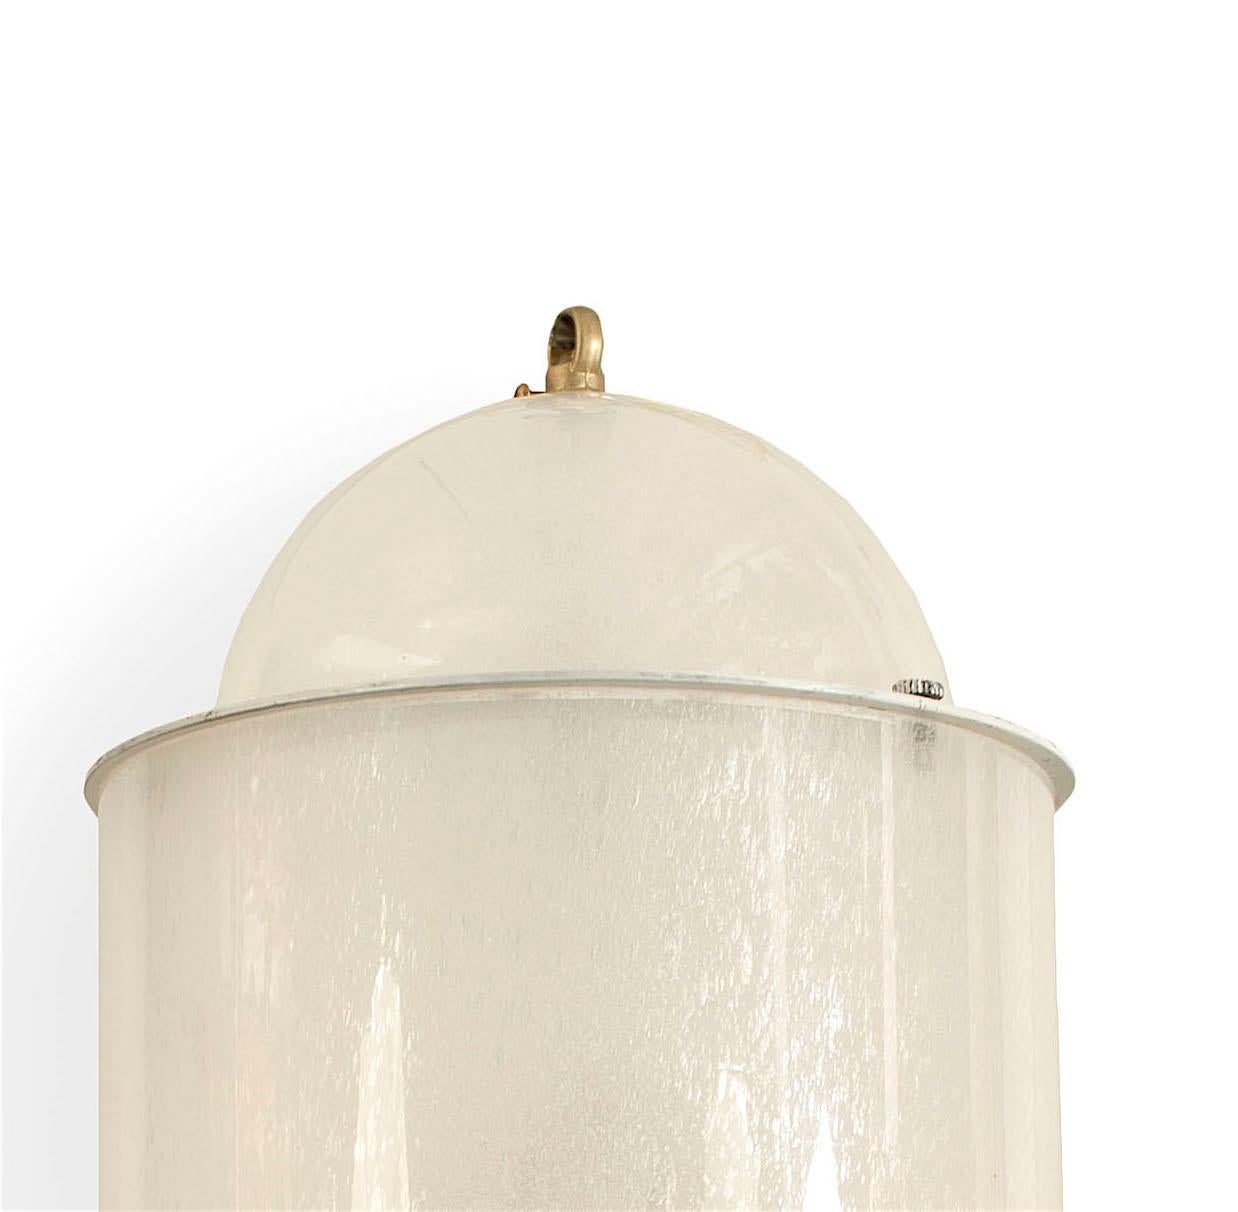 Italian Midcentury, 1940s frosted glass cylindrical lantern with a dome shaped top and bottom having a brass finial ball bottom.

   